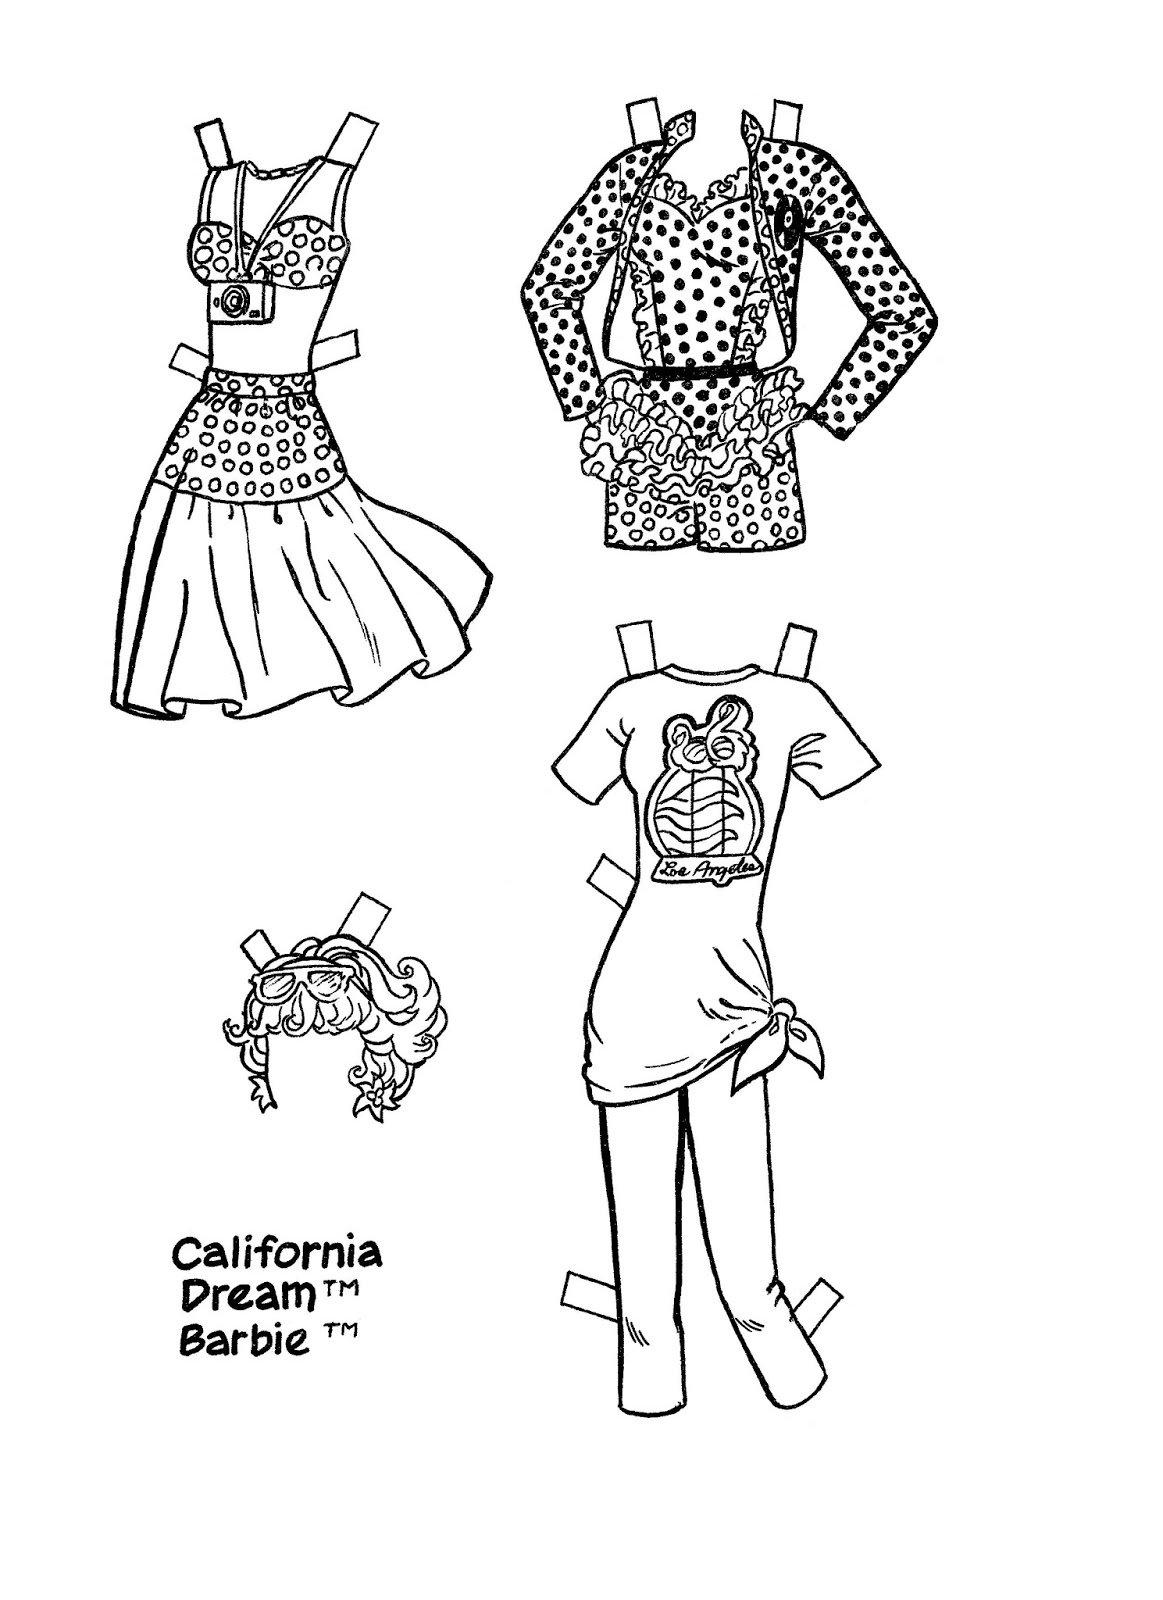 Mostly Paper Dolls Too!: May 2014